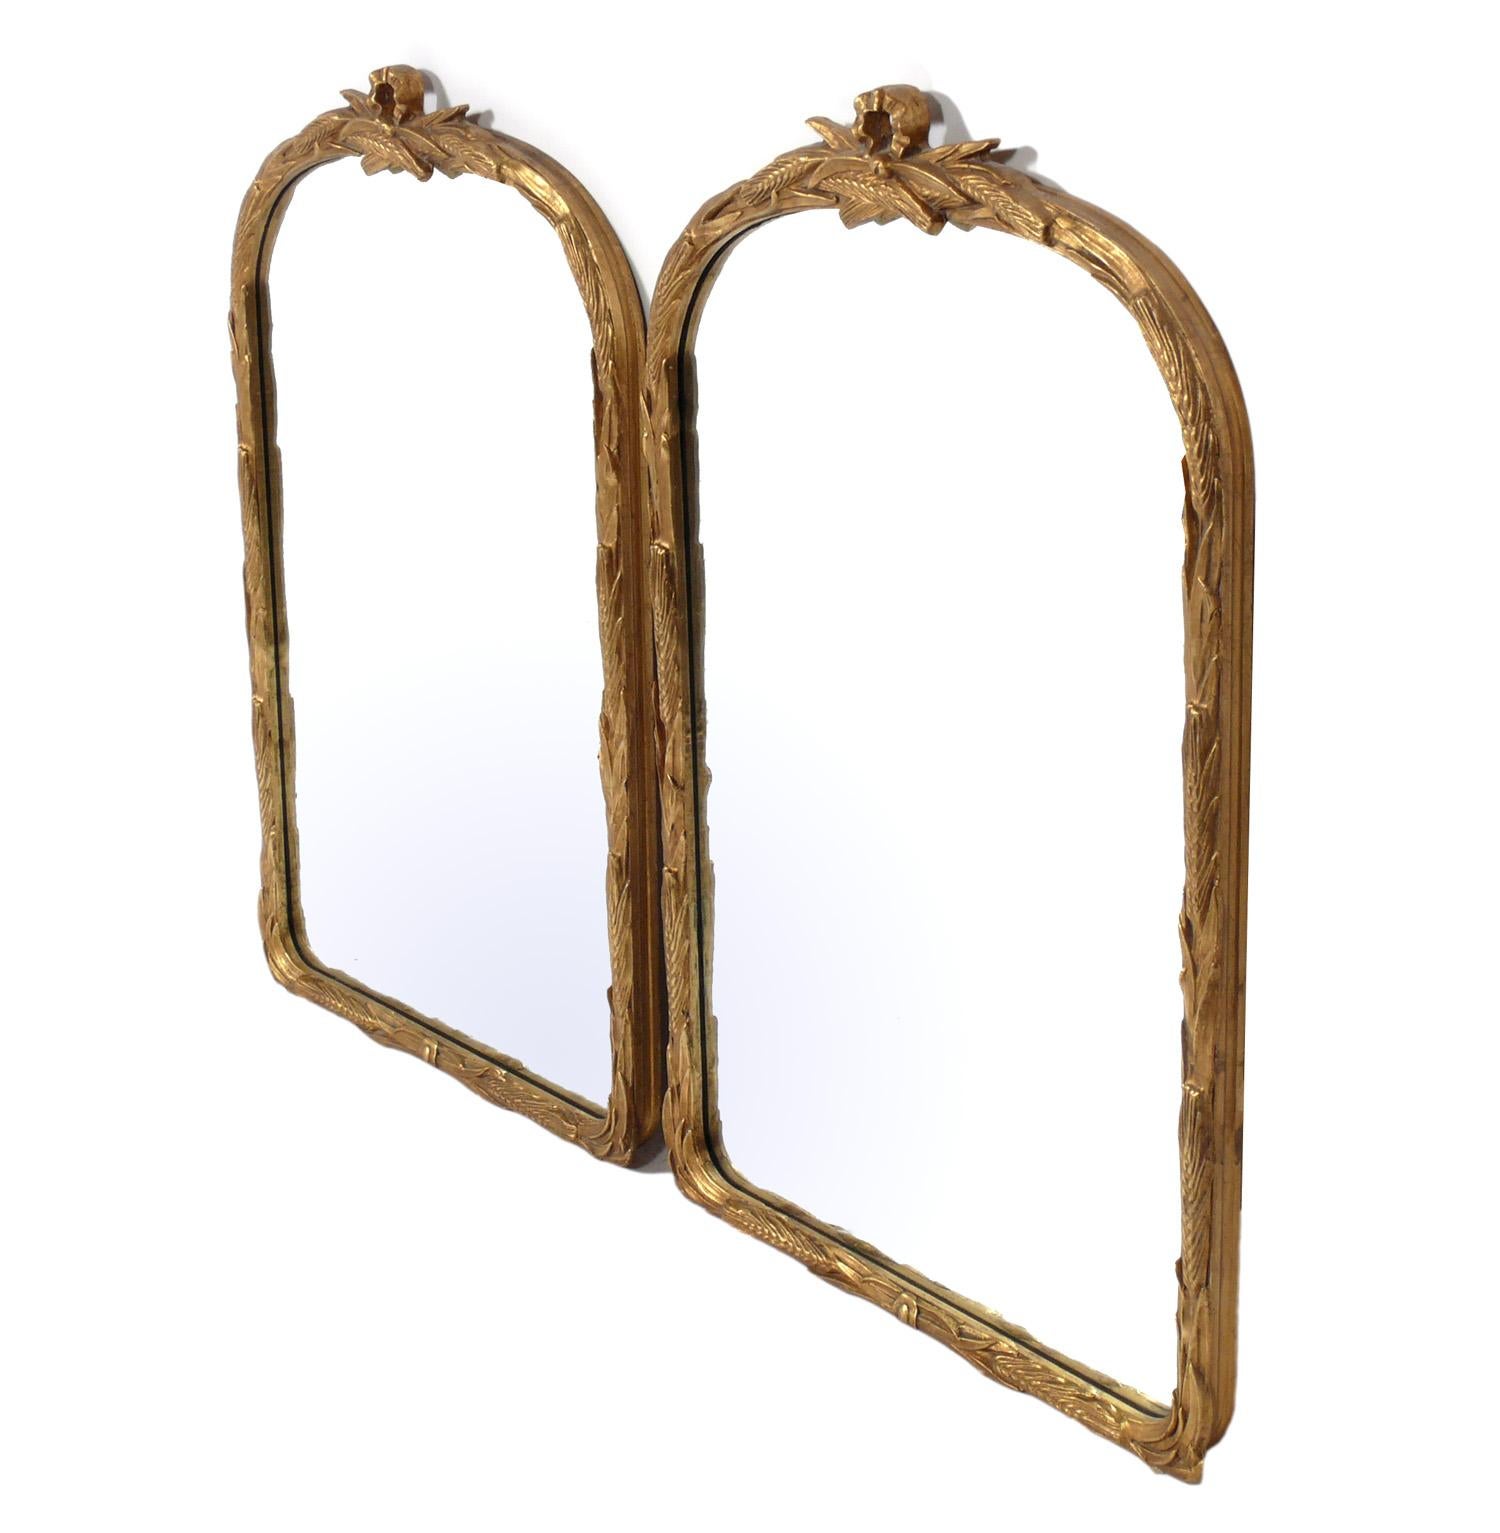 Pair of gilt French mirrors, France, believed to be 1940s, possibly earlier. They retain their warm original patina to the giltwood frames and the original mirrored glass. They are priced at $2900 for the pair, or $1800 each.